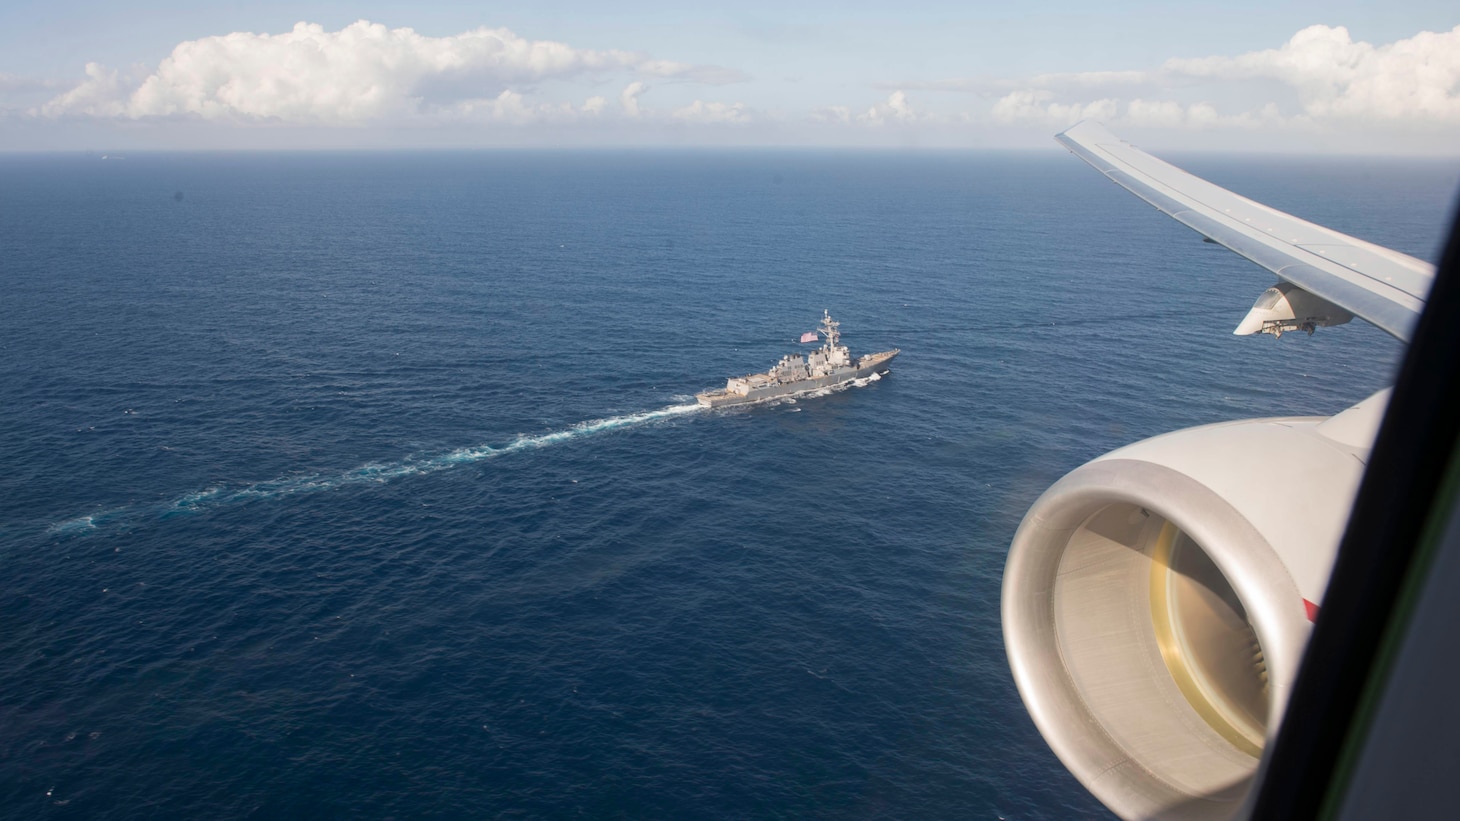 The Arleigh Burke-class guided-missile destroyer USS Roosevelt (DDG 80) as seen from the window of a P-8A Poseidon multi-mission maritime patrol and reconnaissance aircraft assigned to Patrol Squadron (VP), April 23.